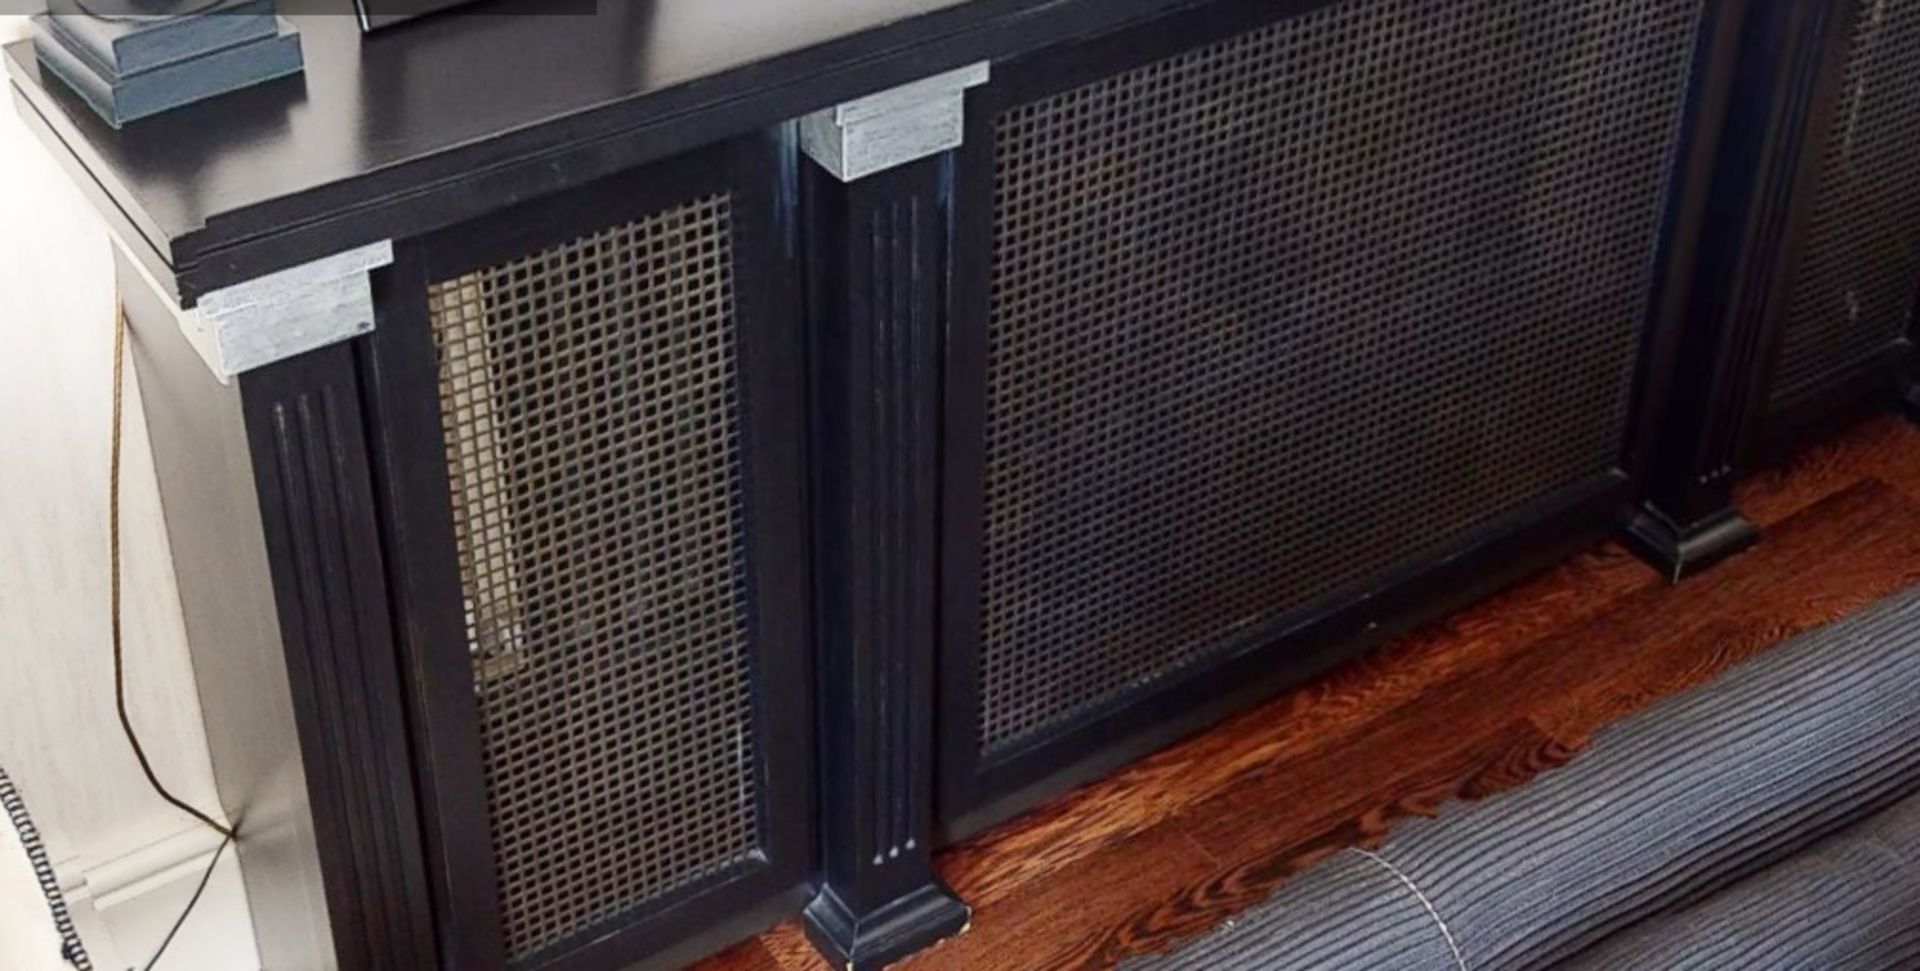 1 x Black Wooden Radiator Cover - To Be Removed From An Exclusive Property In Bowdon  - CL691 - - Image 2 of 2